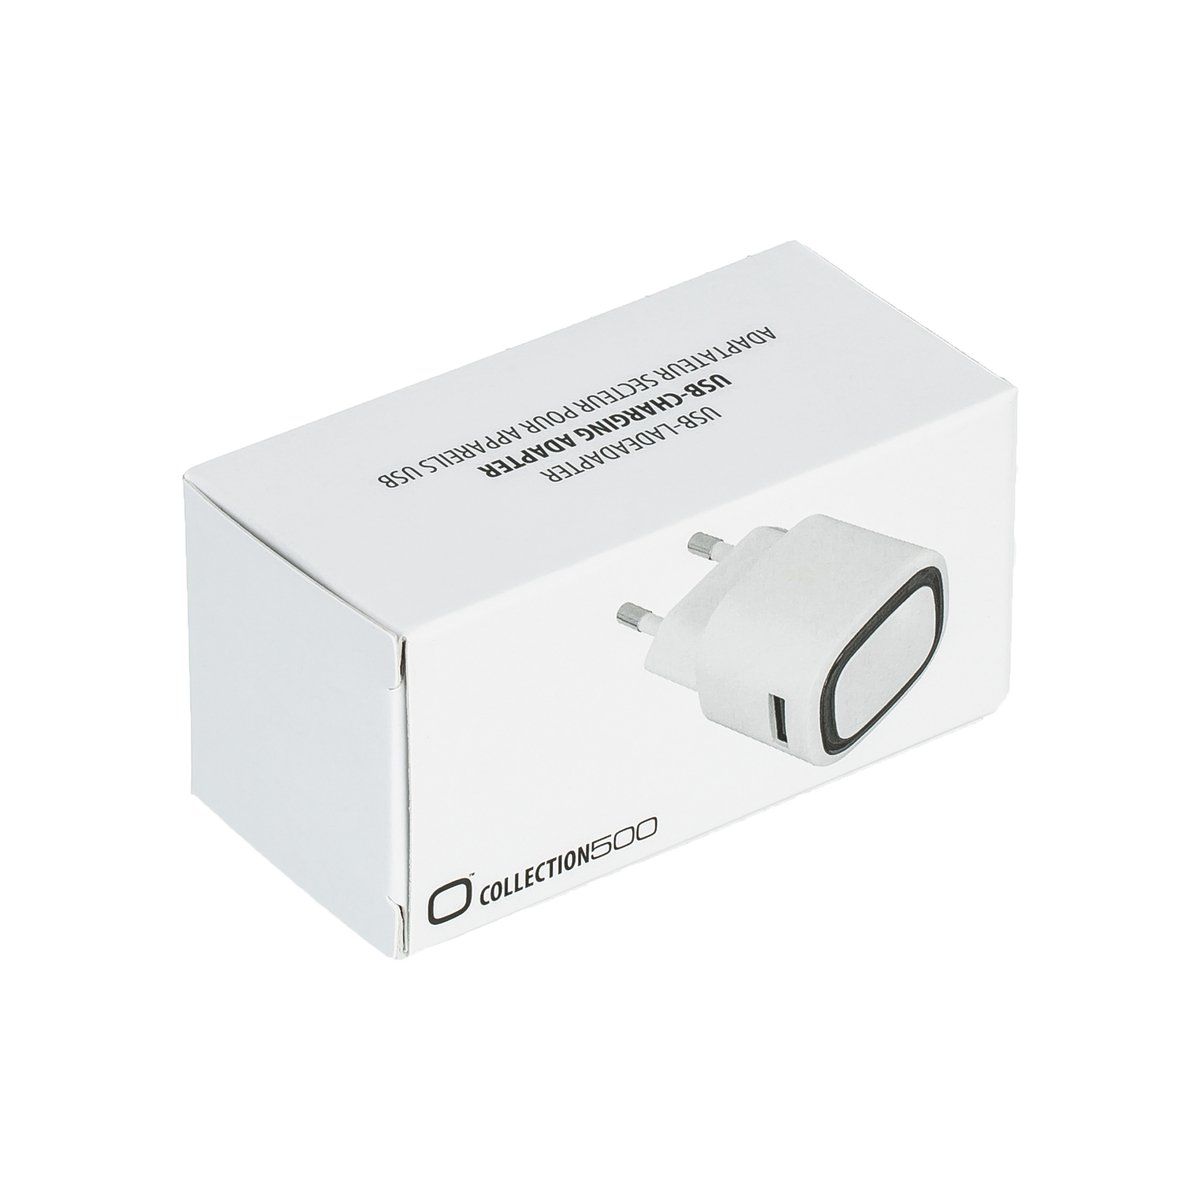 USB-Ladeadapter COLLECTION 500 transparent